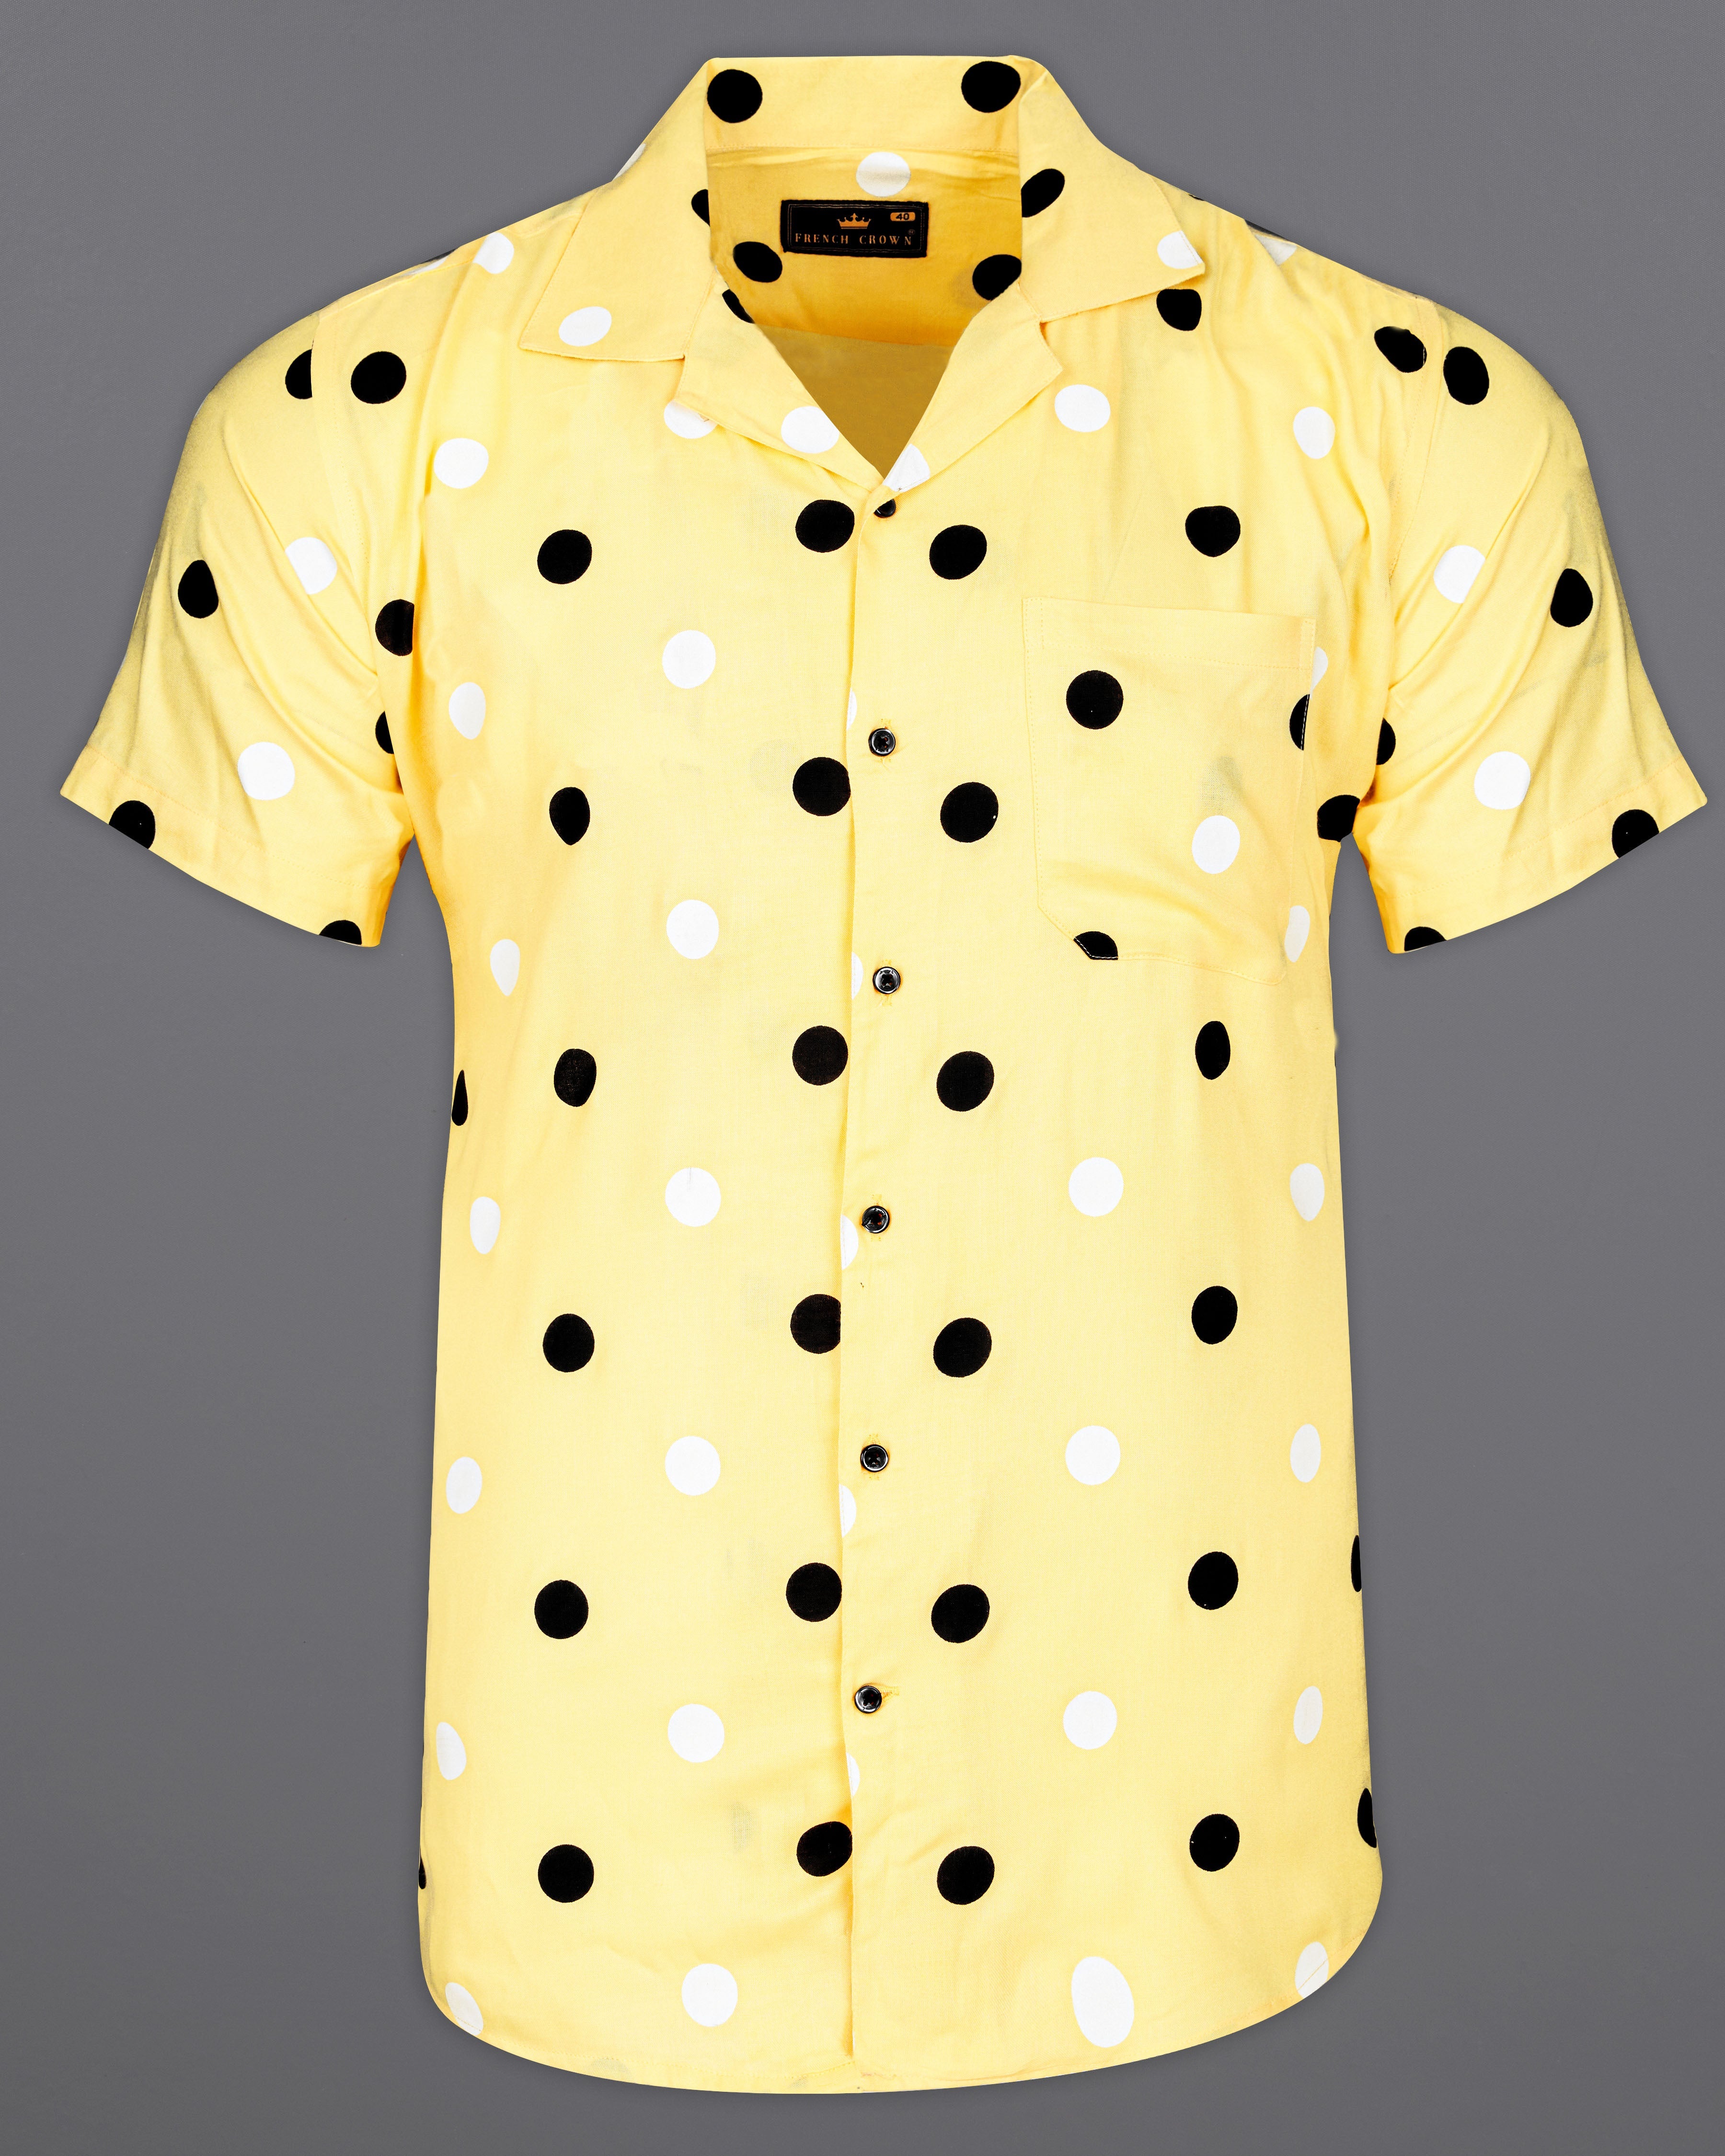 Colonial Yellow with Polka Dotted Half Sleeved Premium Tencel Shirt 9512-CC-BLK-SS-38, 9512-CC-BLK-SS-H-38, 9512-CC-BLK-SS-39, 9512-CC-BLK-SS-H-39, 9512-CC-BLK-SS-40, 9512-CC-BLK-SS-H-40, 9512-CC-BLK-SS-42, 9512-CC-BLK-SS-H-42, 9512-CC-BLK-SS-44, 9512-CC-BLK-SS-H-44, 9512-CC-BLK-SS-46, 9512-CC-BLK-SS-H-46, 9512-CC-BLK-SS-48, 9512-CC-BLK-SS-H-48, 9512-CC-BLK-SS-50, 9512-CC-BLK-SS-H-50, 9512-CC-BLK-SS-52, 9512-CC-BLK-SS-H-52